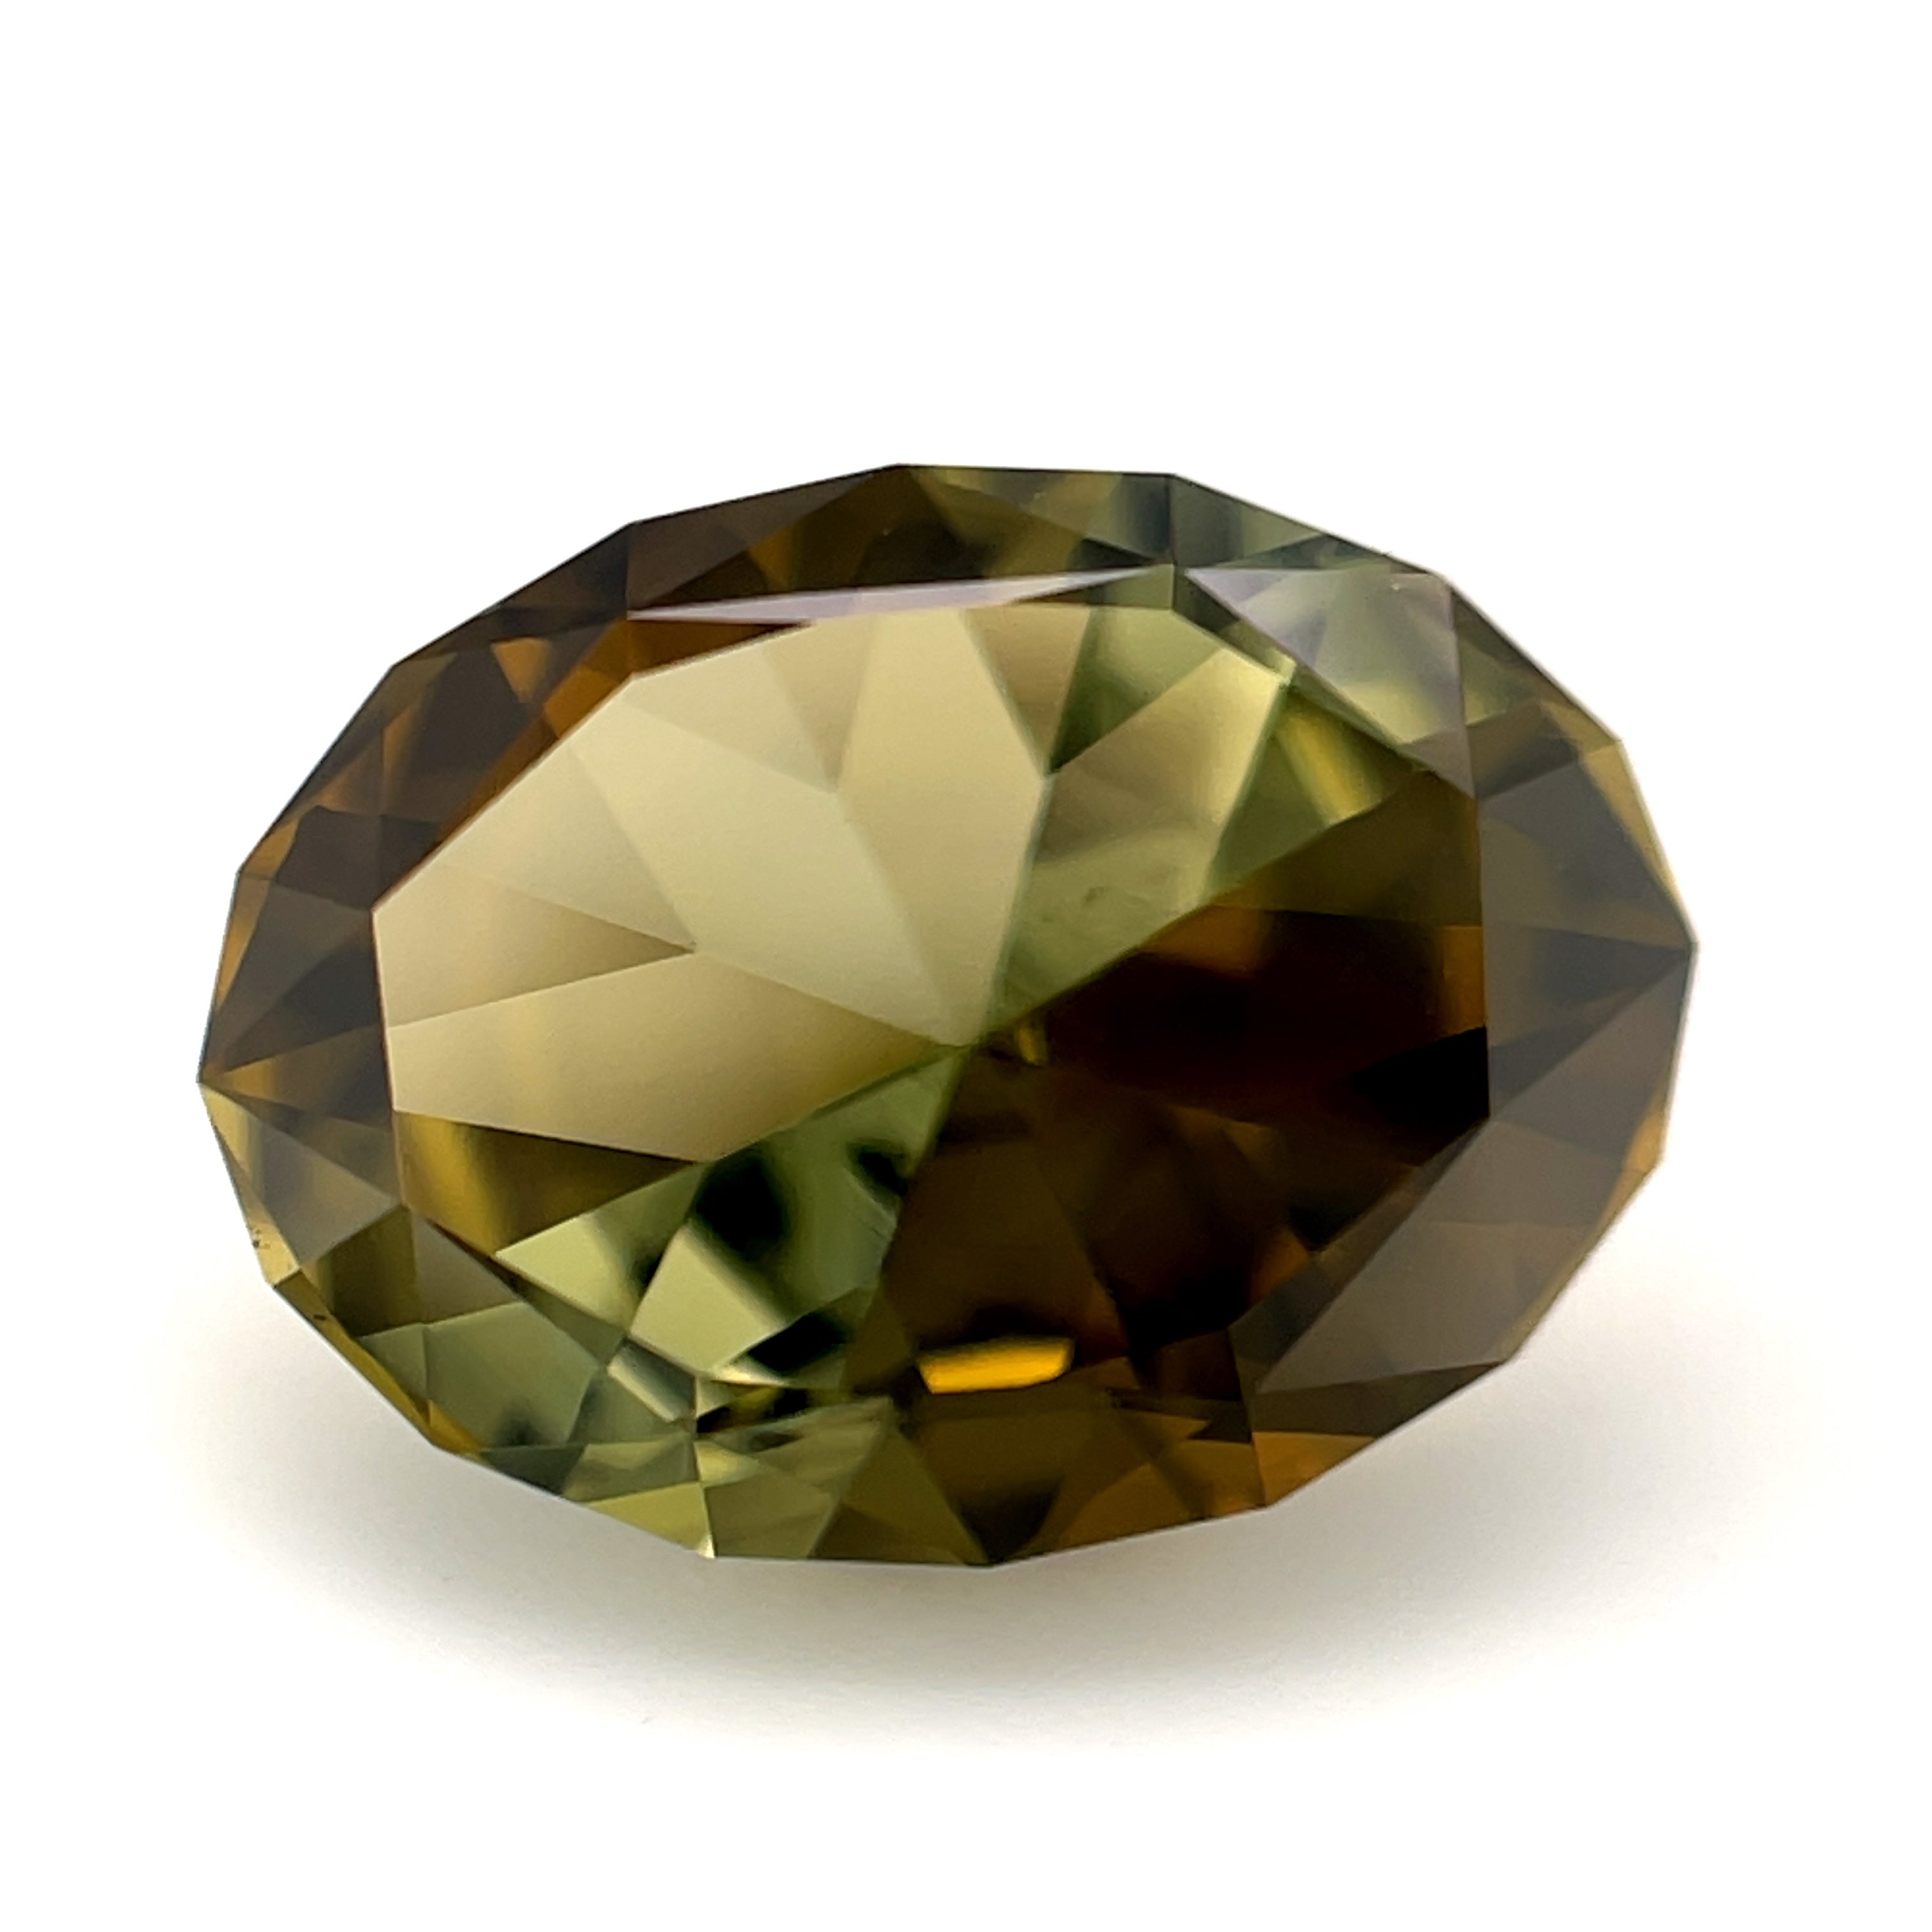 Faceted Tourmaline - 4.26 CTW